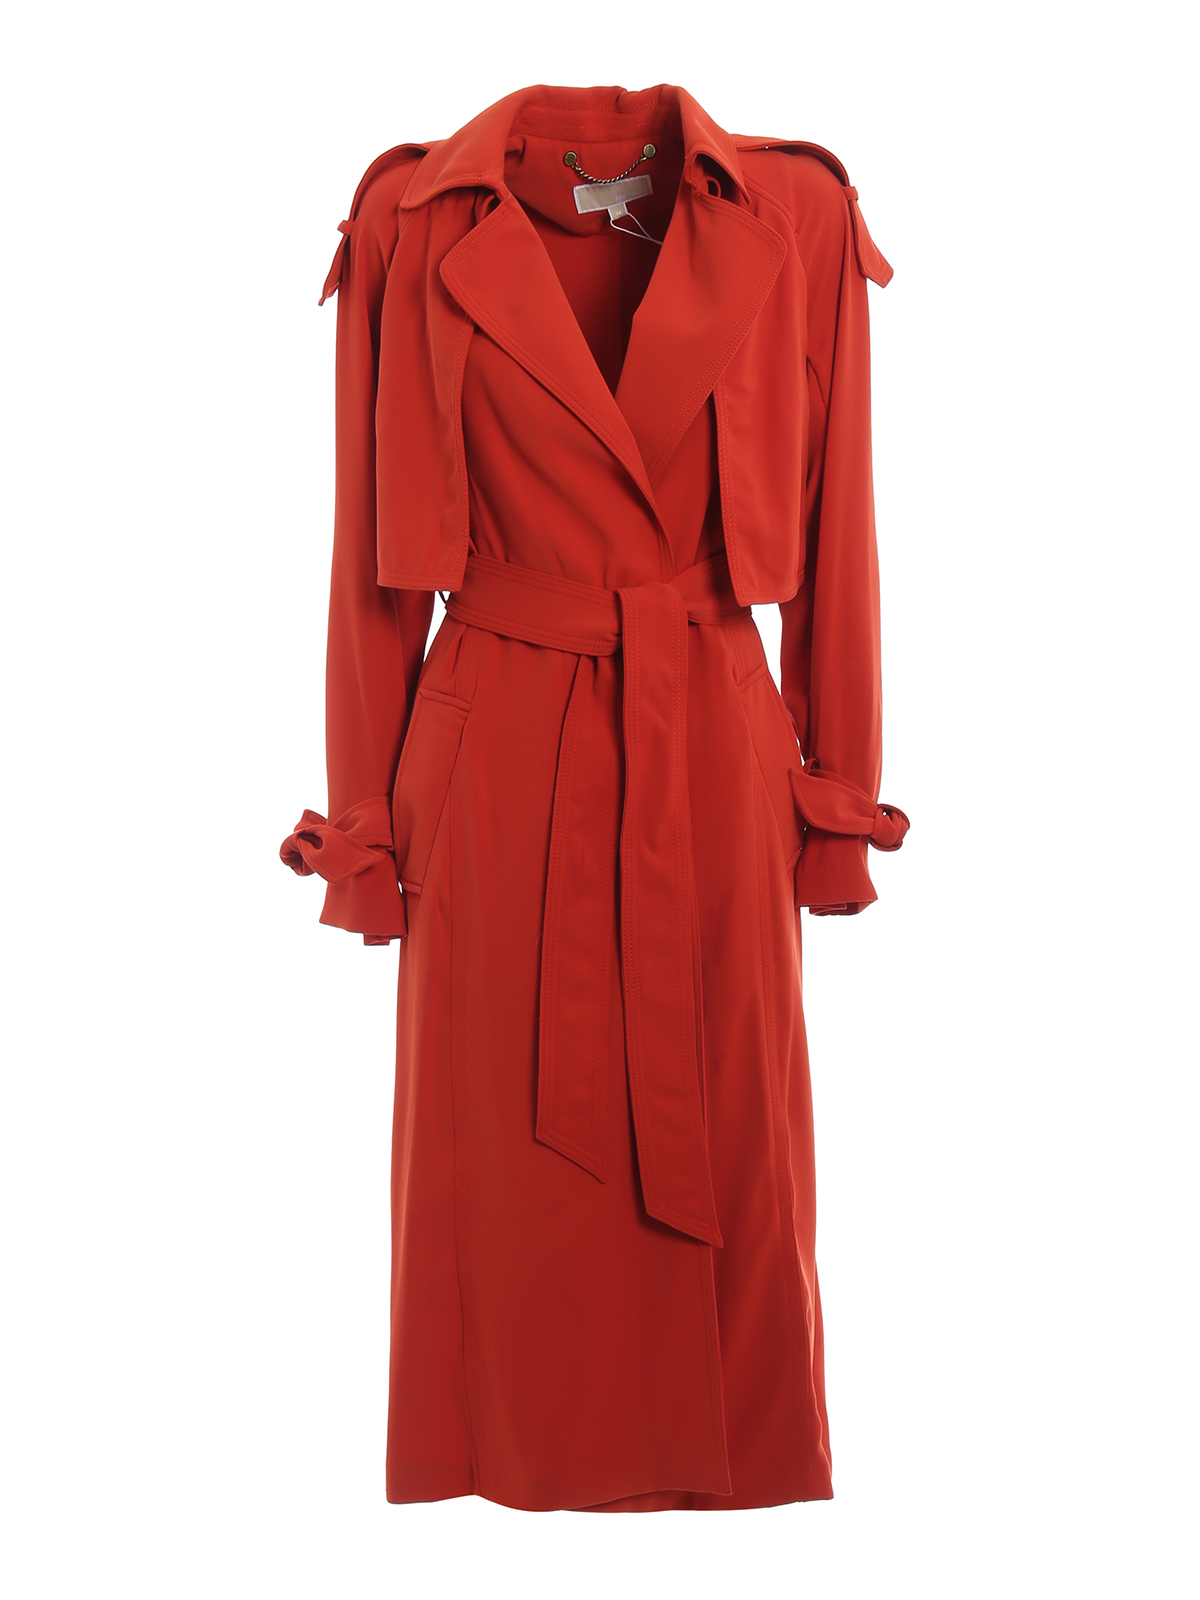 michael kors red leather trench coat